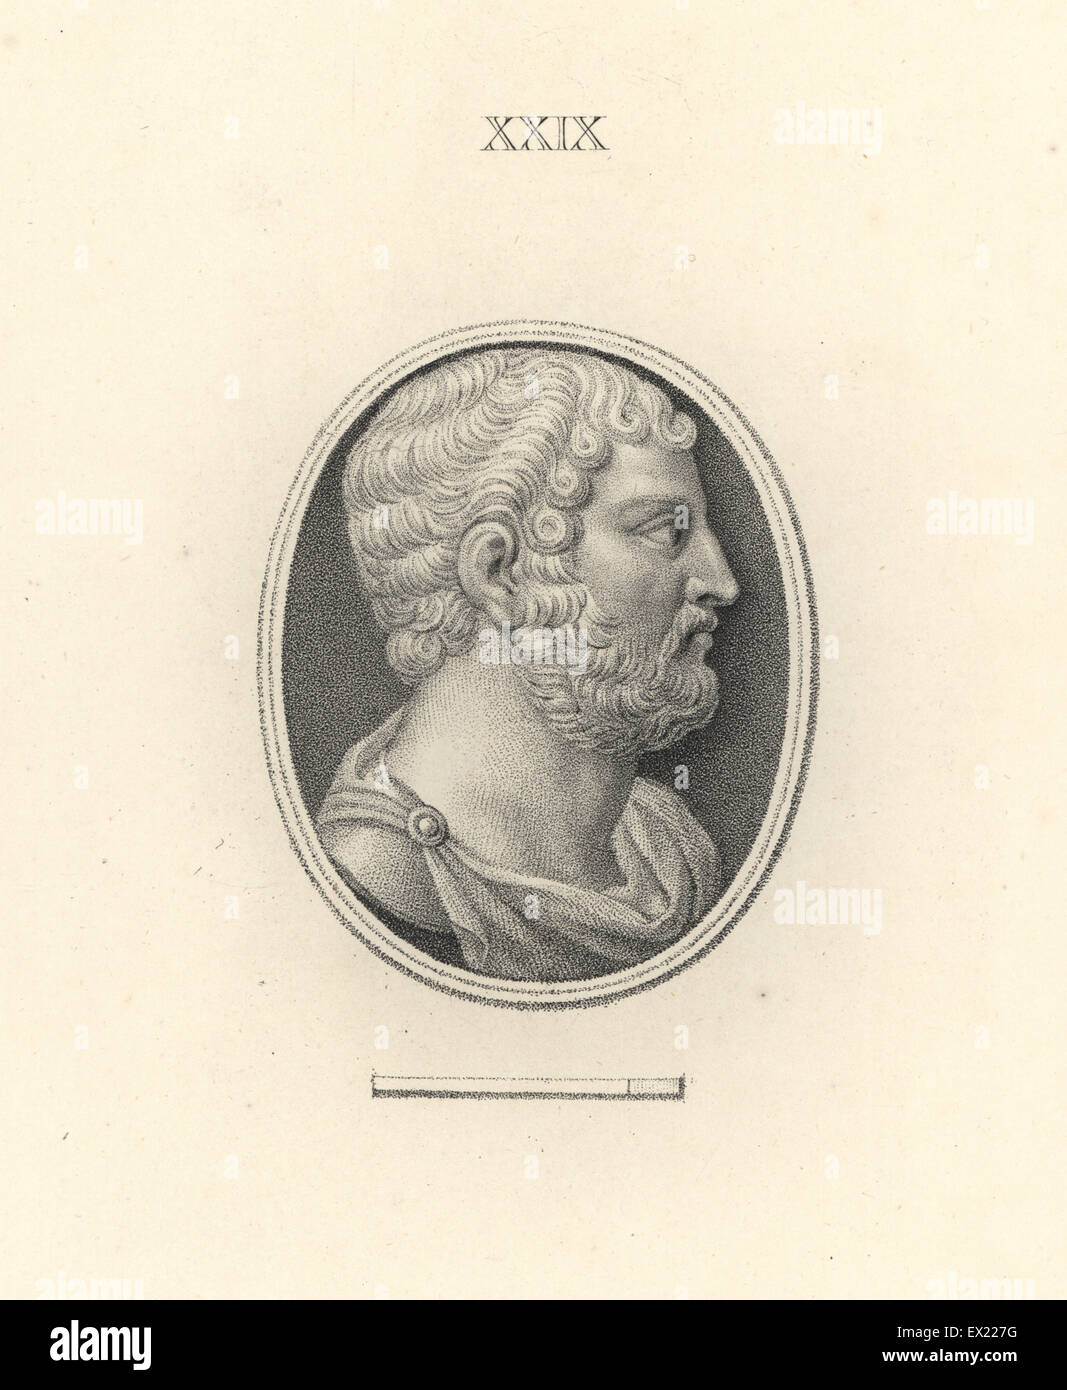 Roman Emperor Hadrian. Copperplate engraving by Francesco Bartolozzi from 108 Plates of Antique Gems, 1860. The gems were from the Duke of Marlborough's collection. Stock Photo